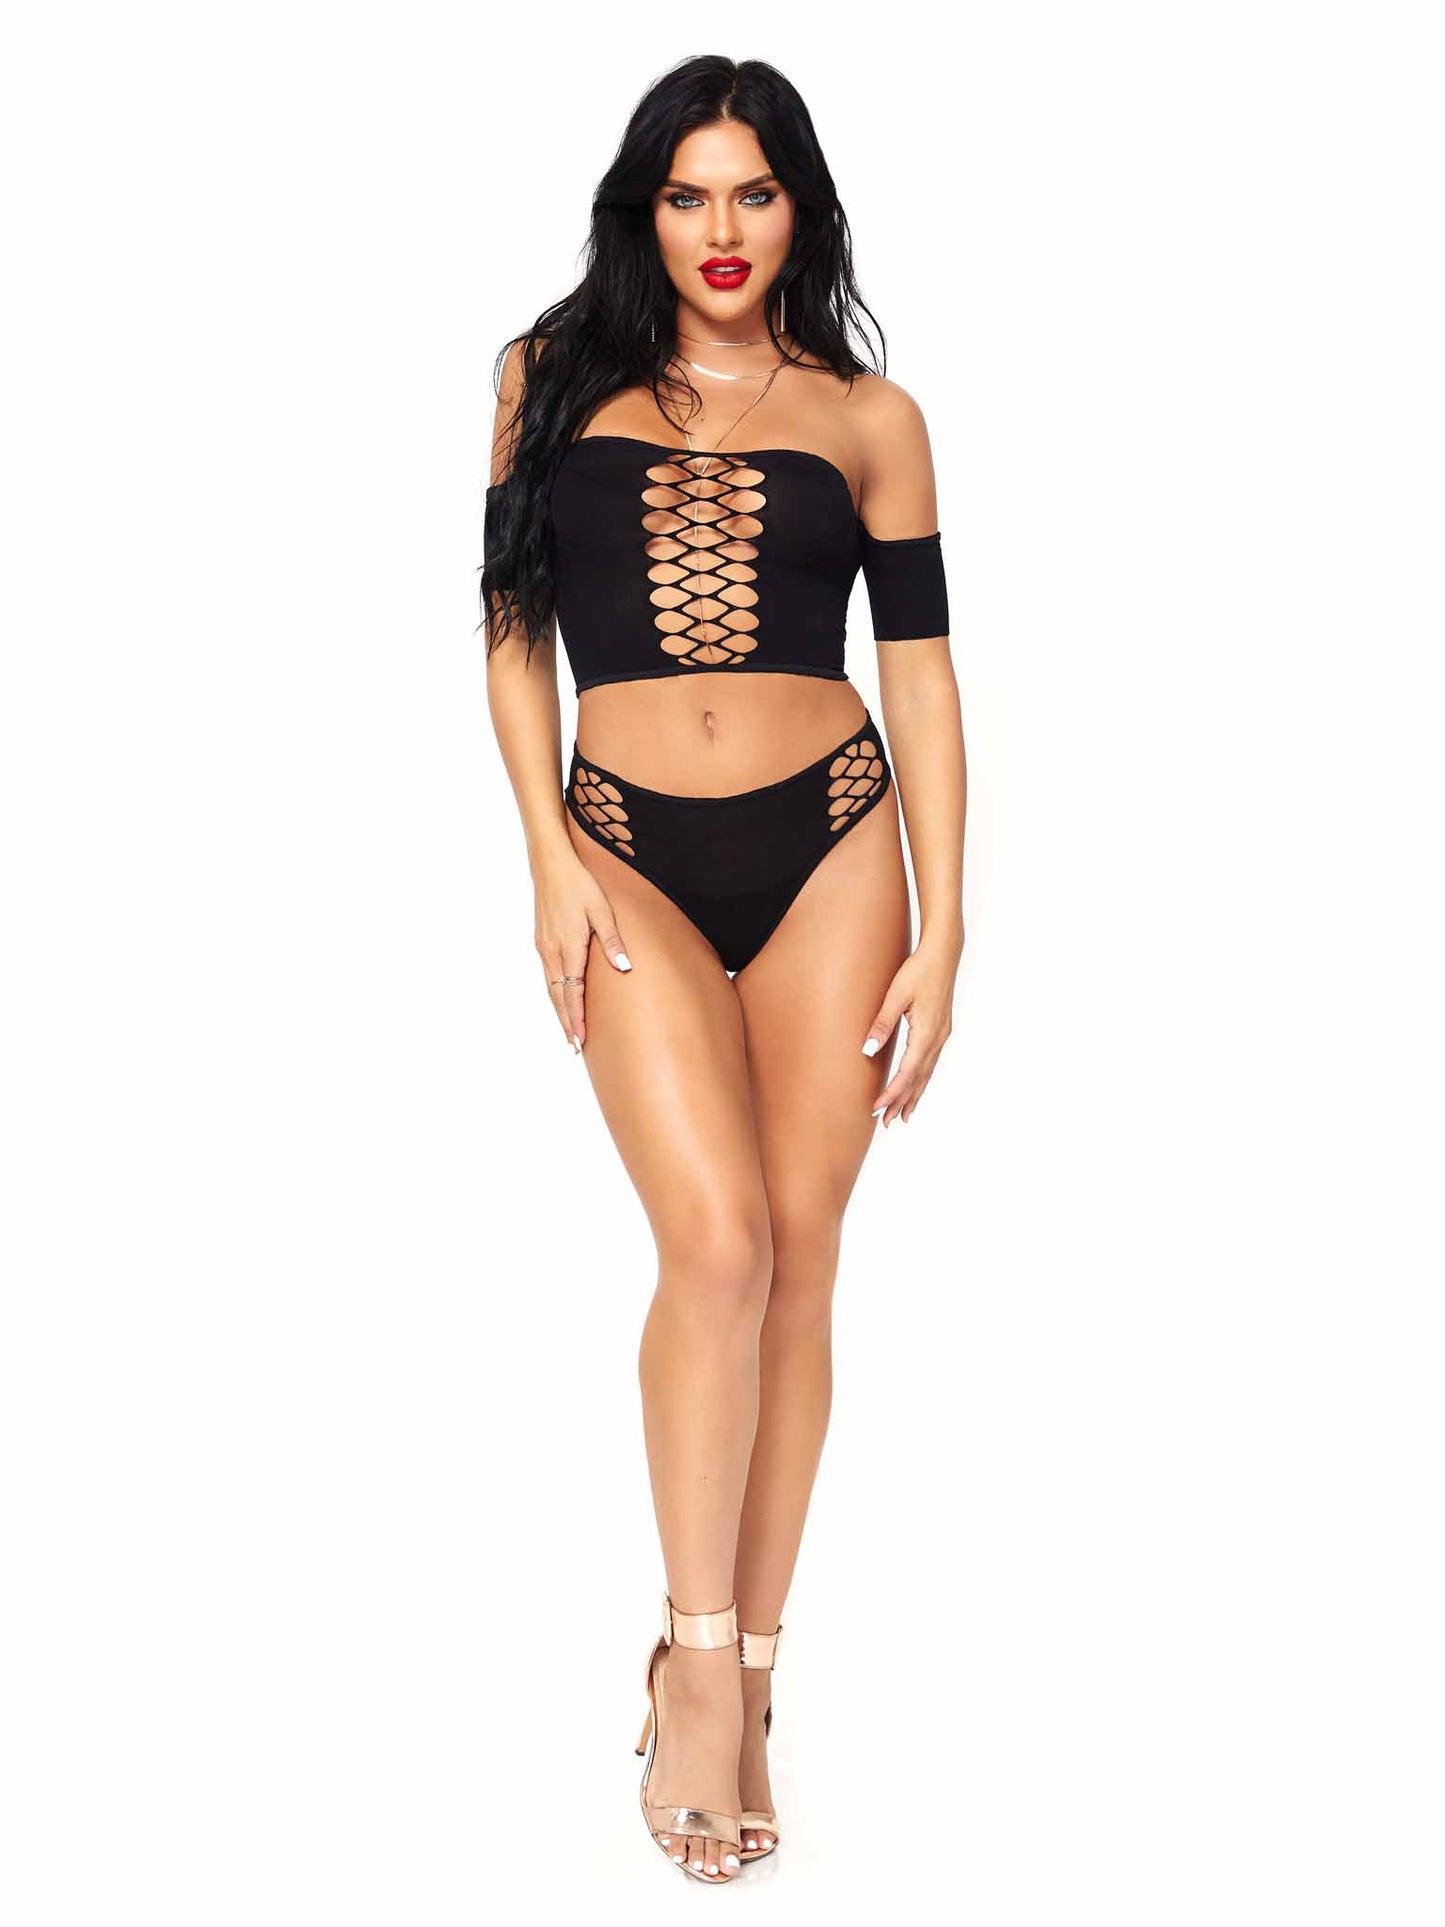 81572 - 2 Pc Opaque Crop Top With Net Detail And Matching Thong Back Bottoms.